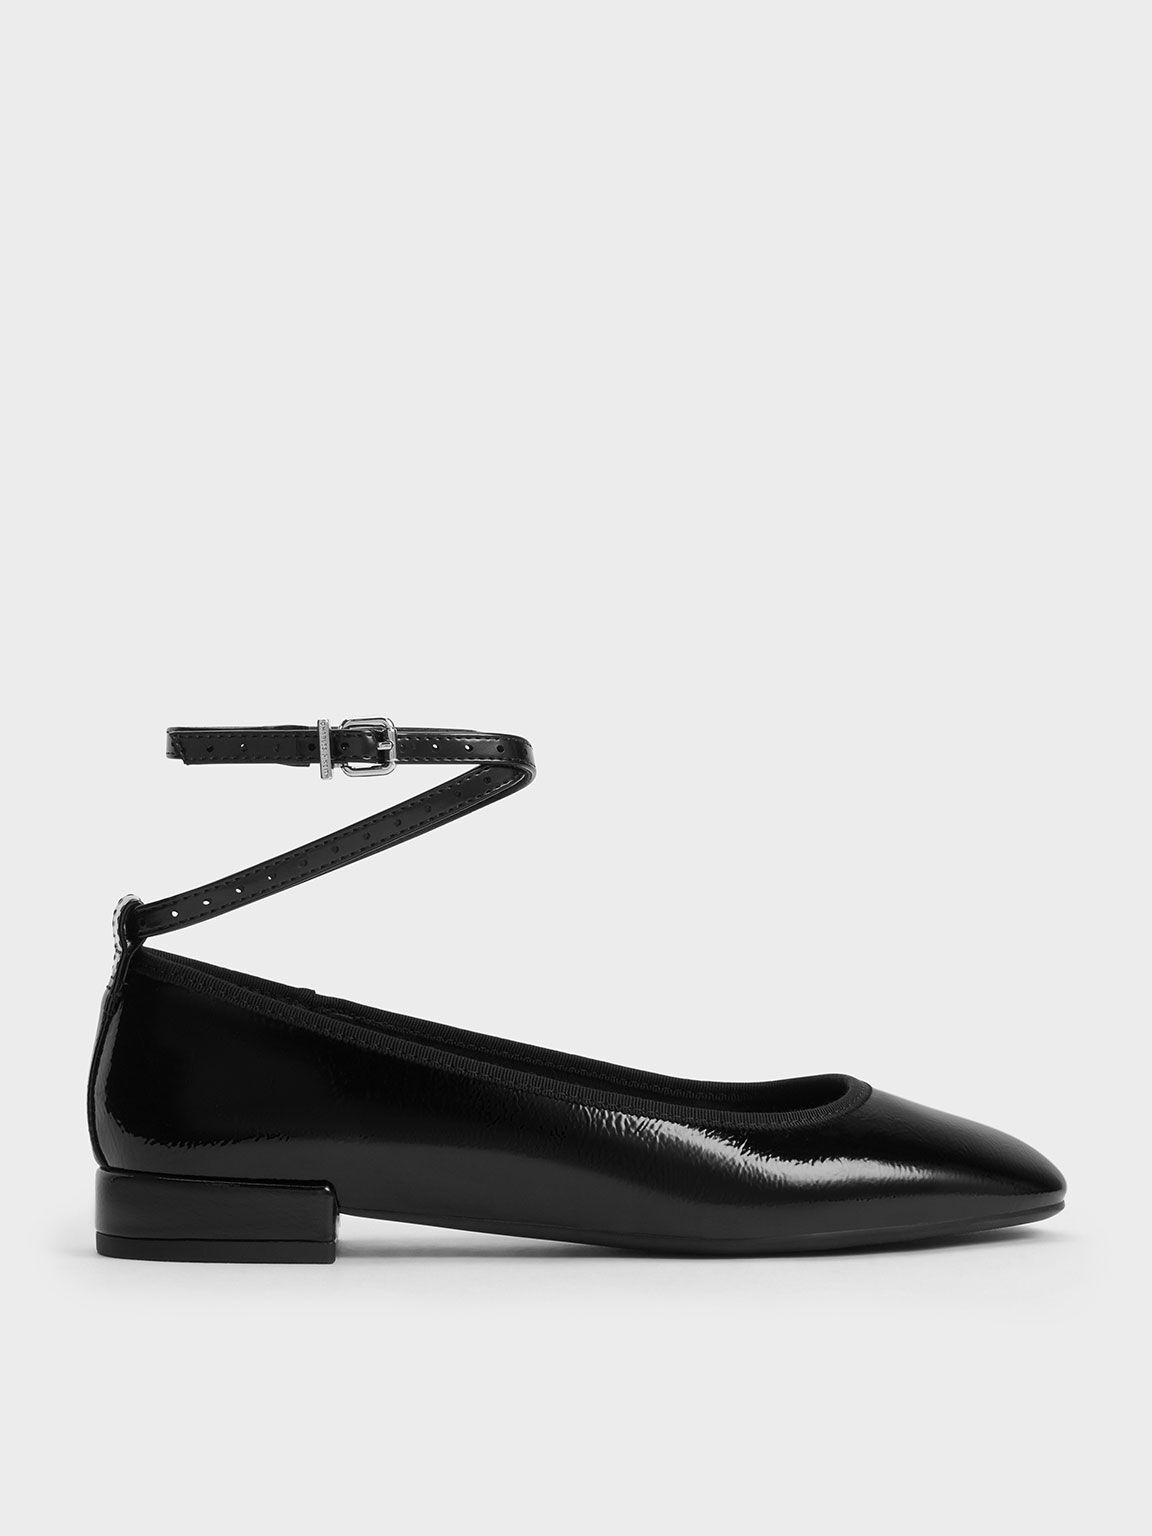 Women's Flats | Shop Exclusives Styles | CHARLES & KEITH International